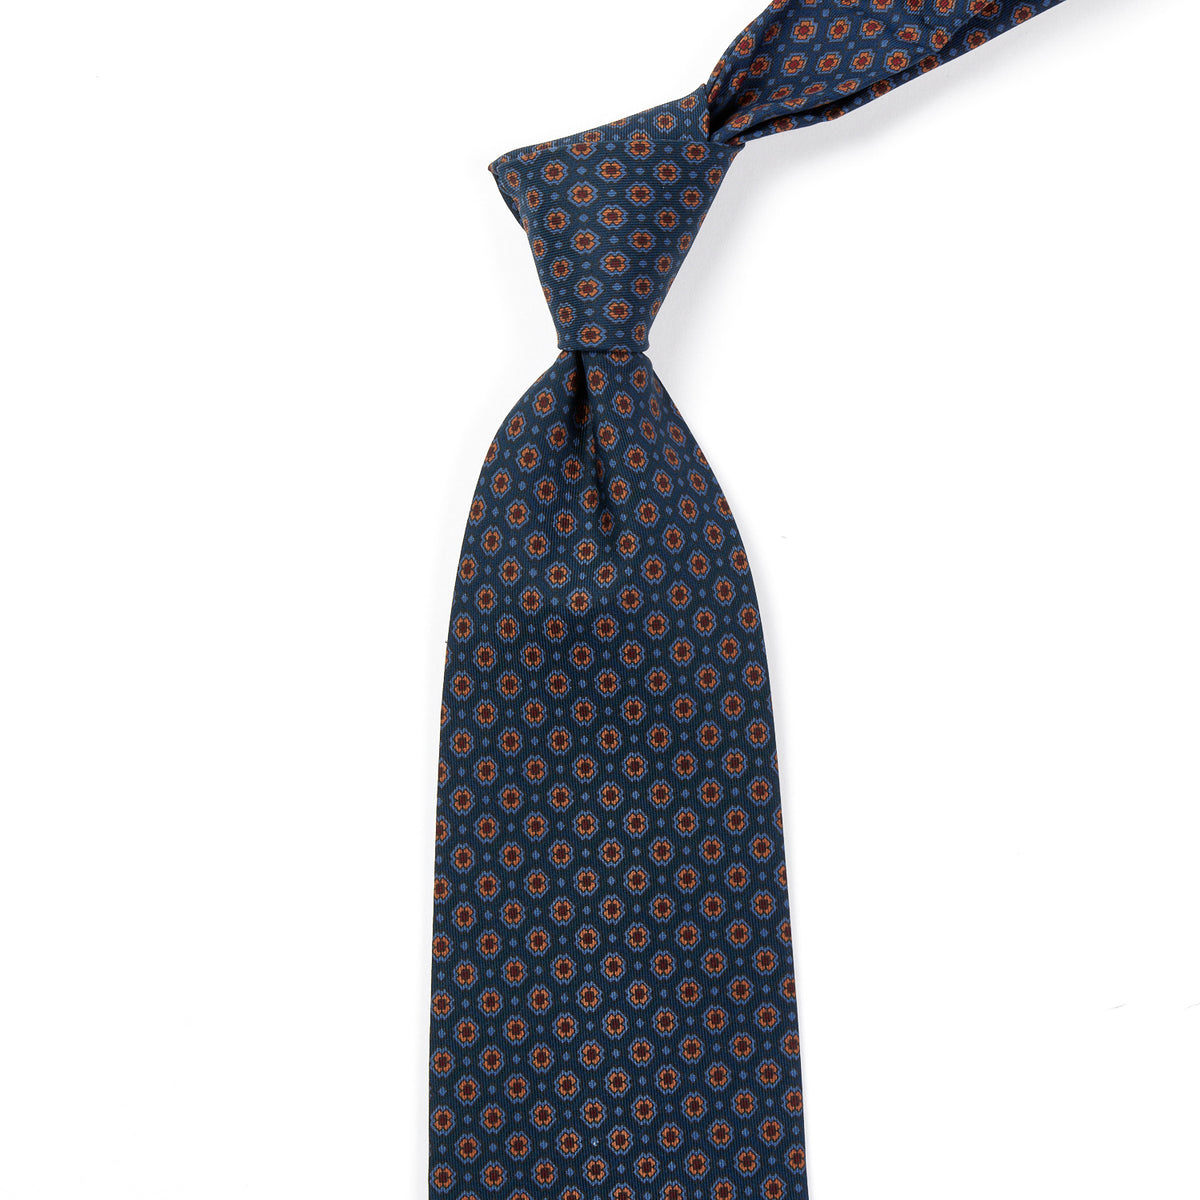 A Sovereign Grade Blue Small Floral Ancient Madder Tie from KirbyAllison.com, with a blue and orange pattern of the highest quality.